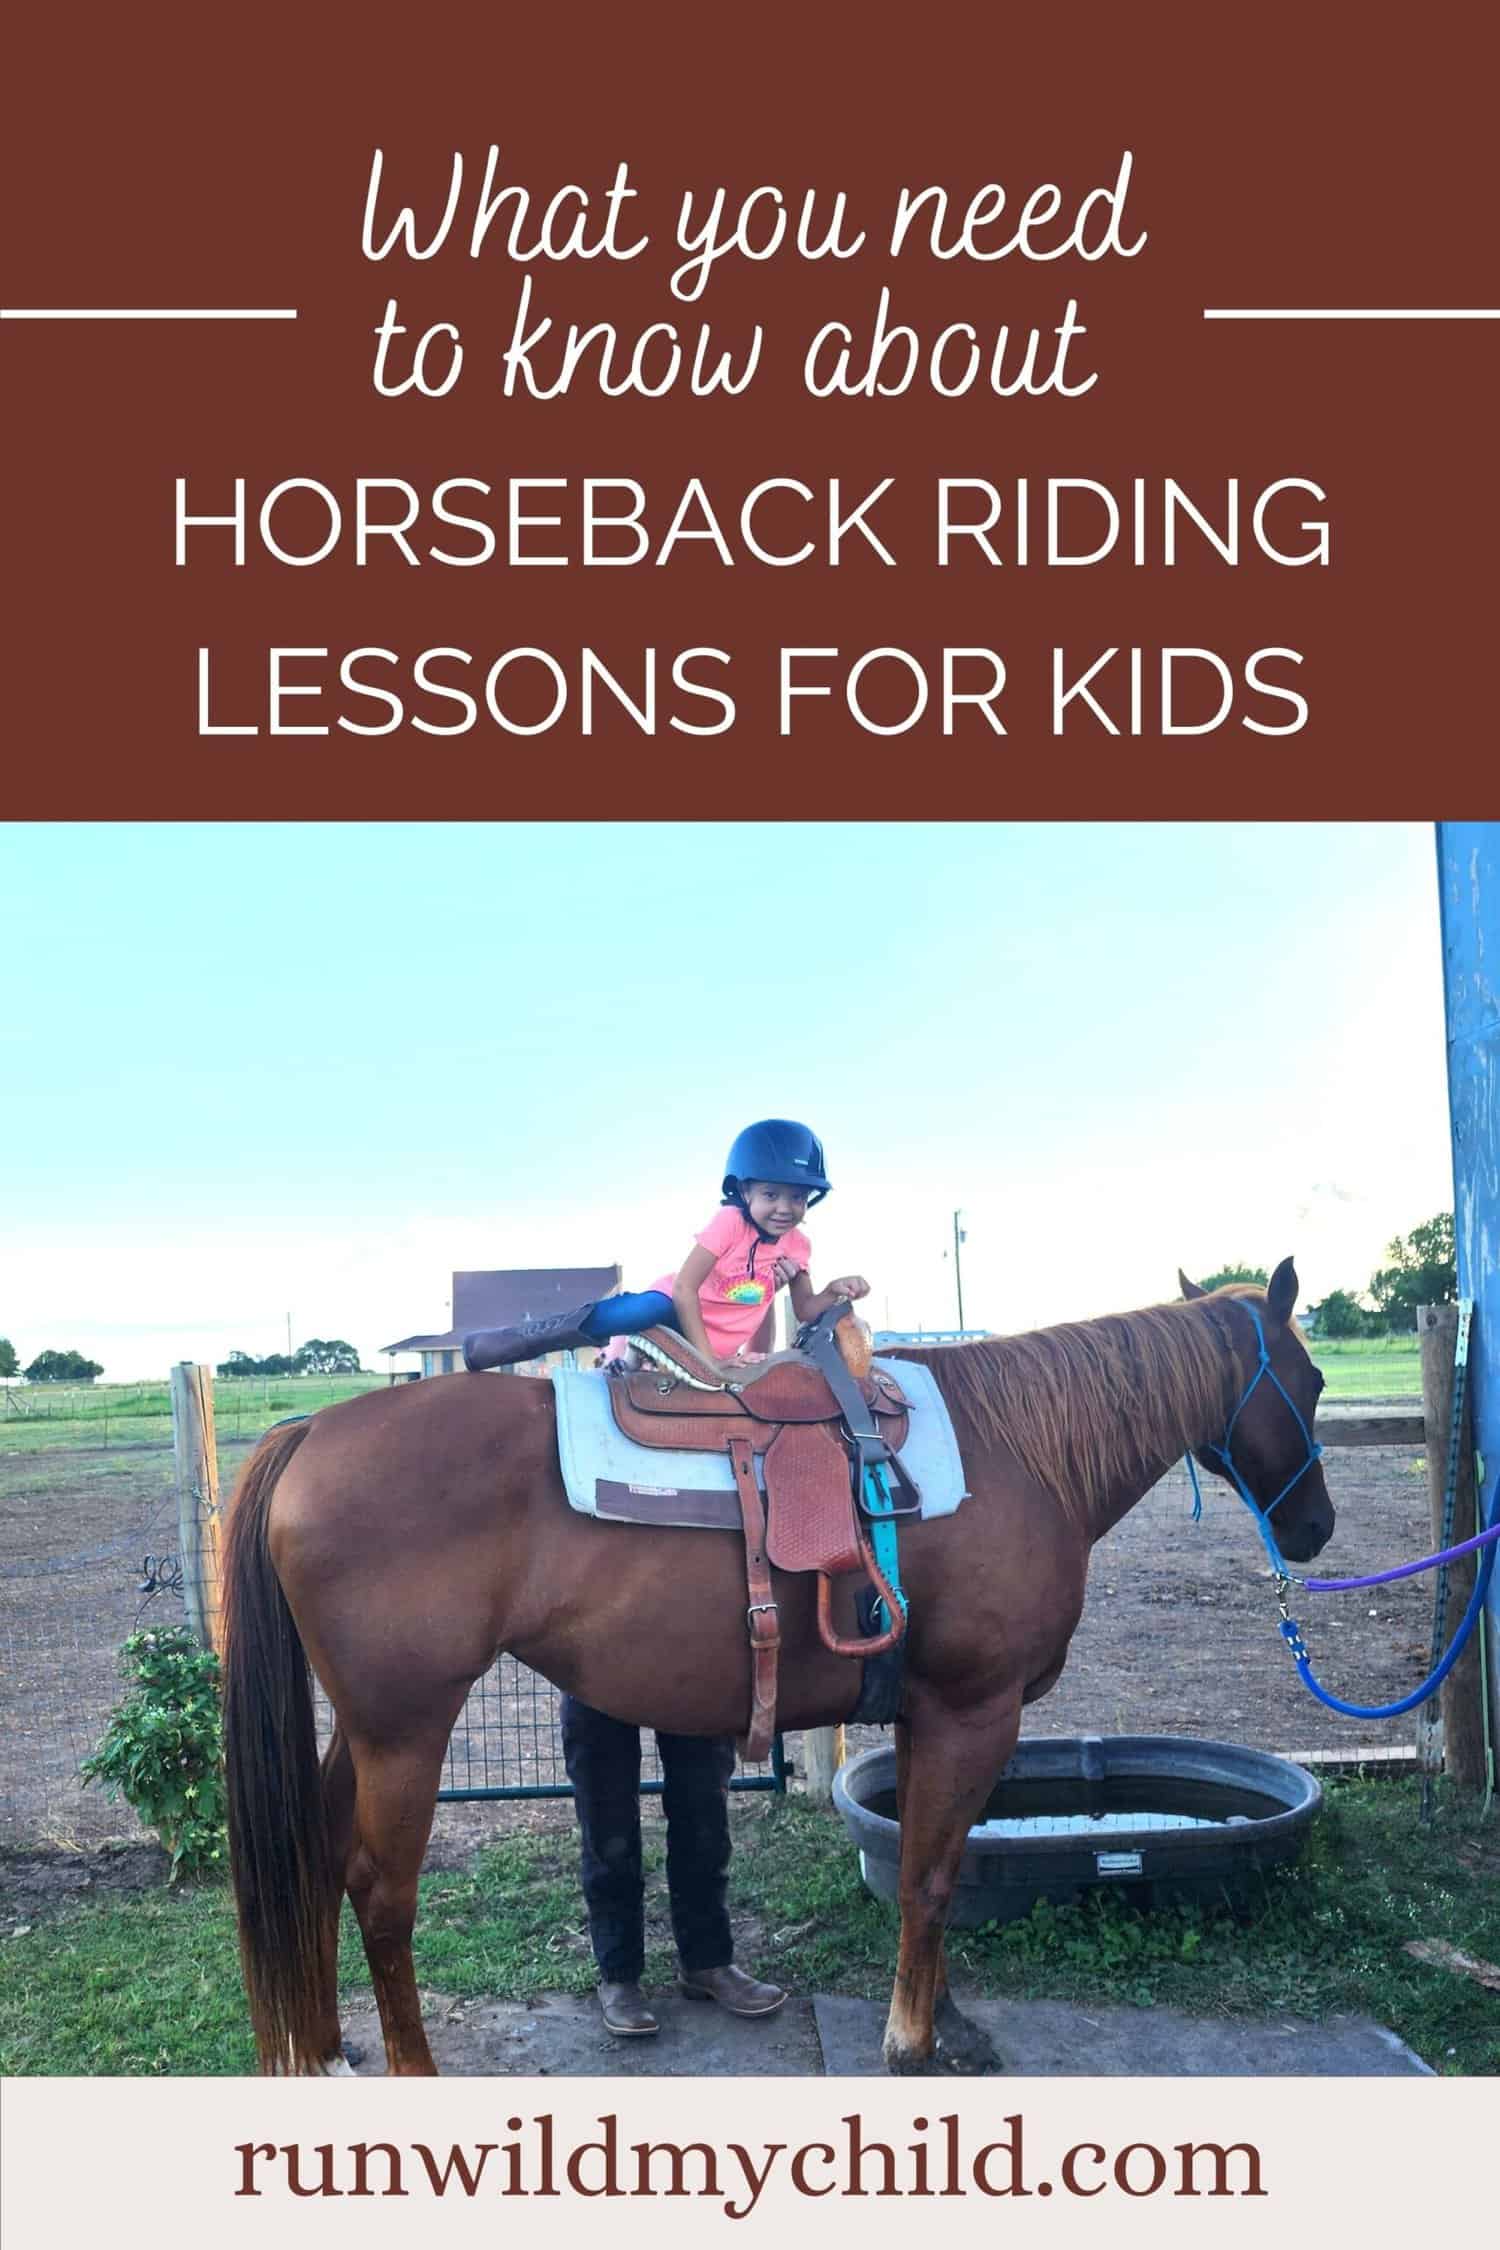 What you need to know about horseback riding lessons for kids